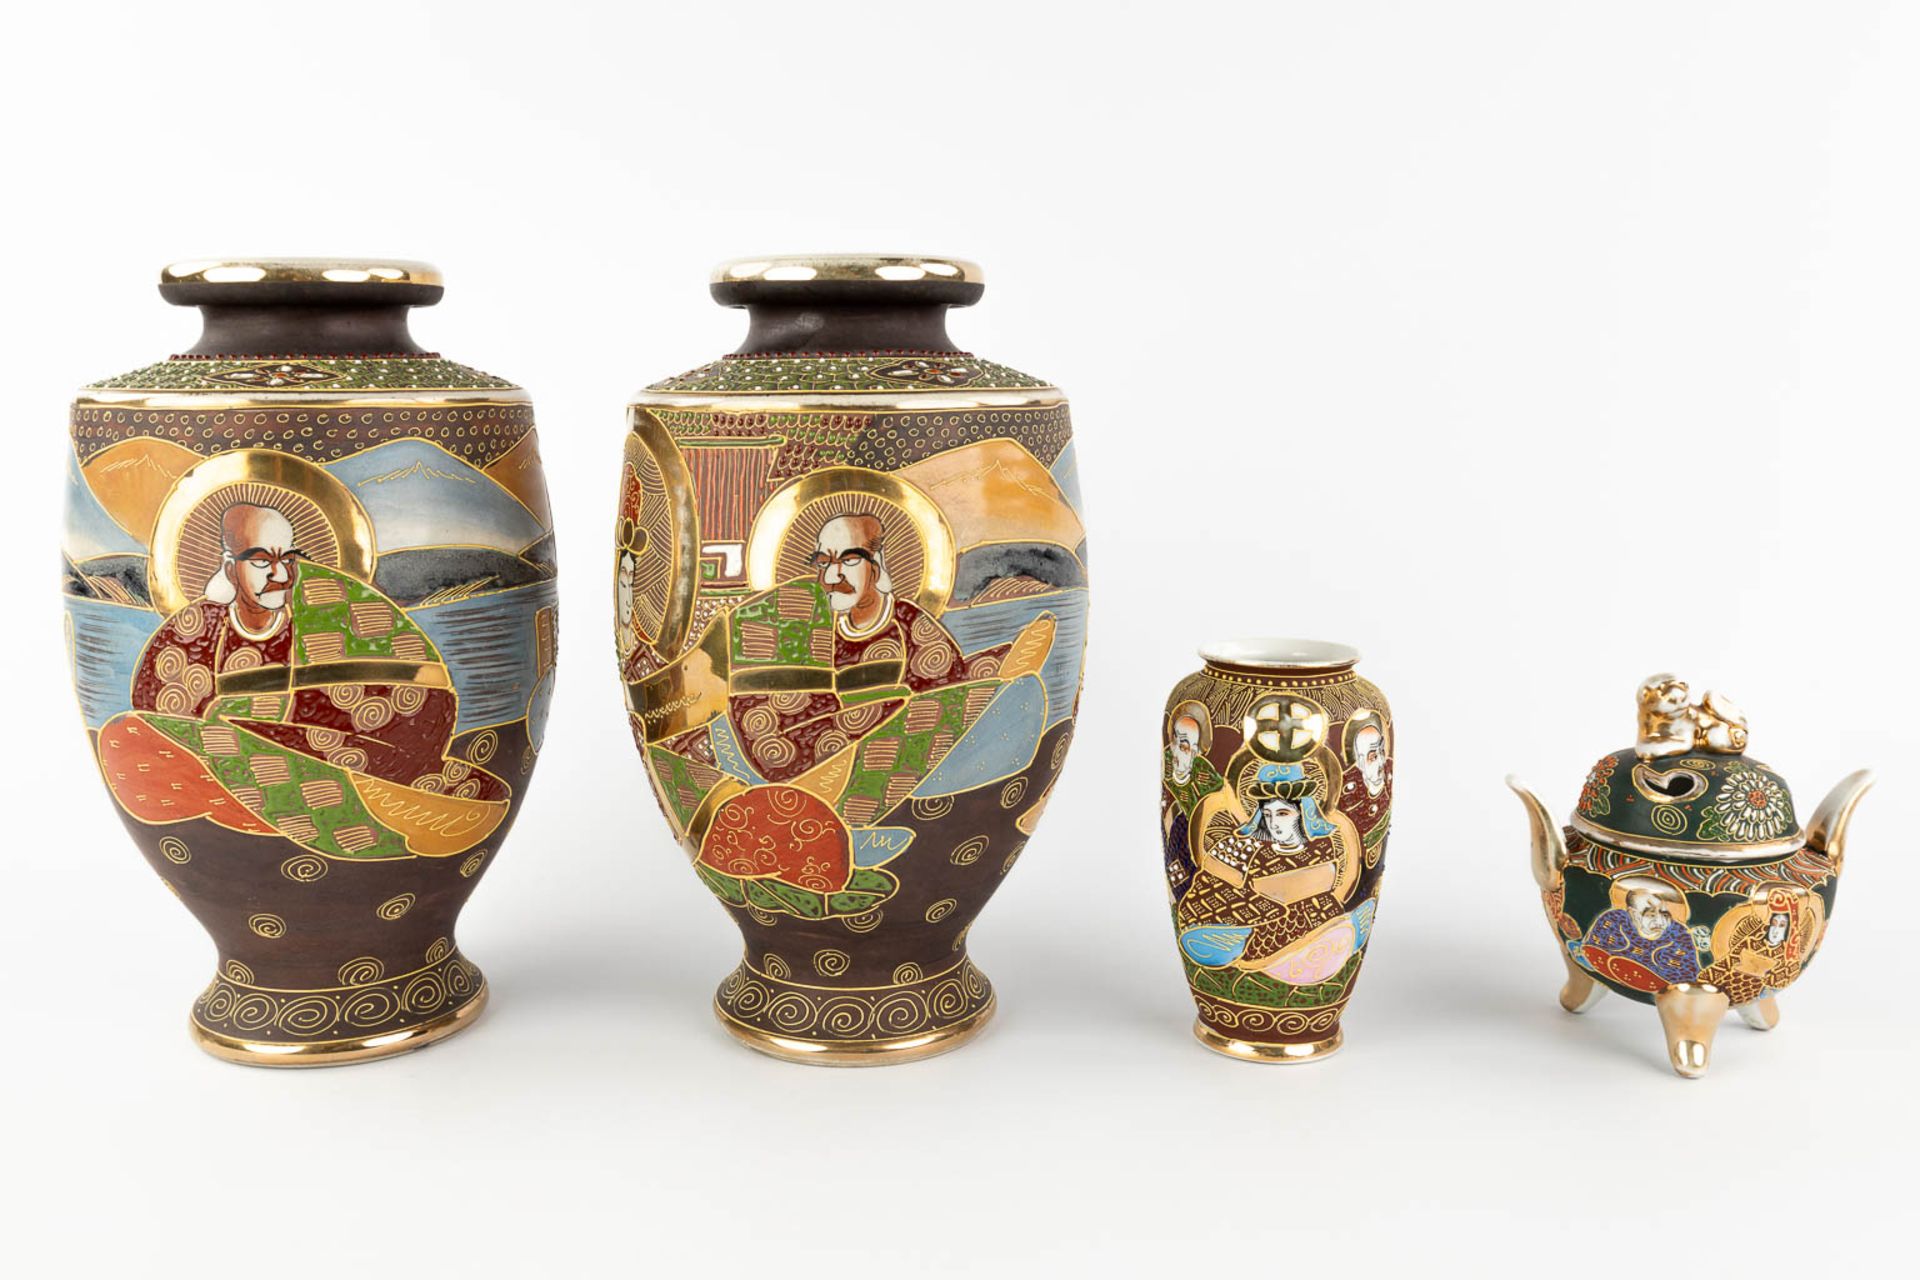 A pair of vases, a vase and jar with lid, Satsuma faience, Japan. 20th C. (H:31 x D:19 cm) - Image 3 of 19